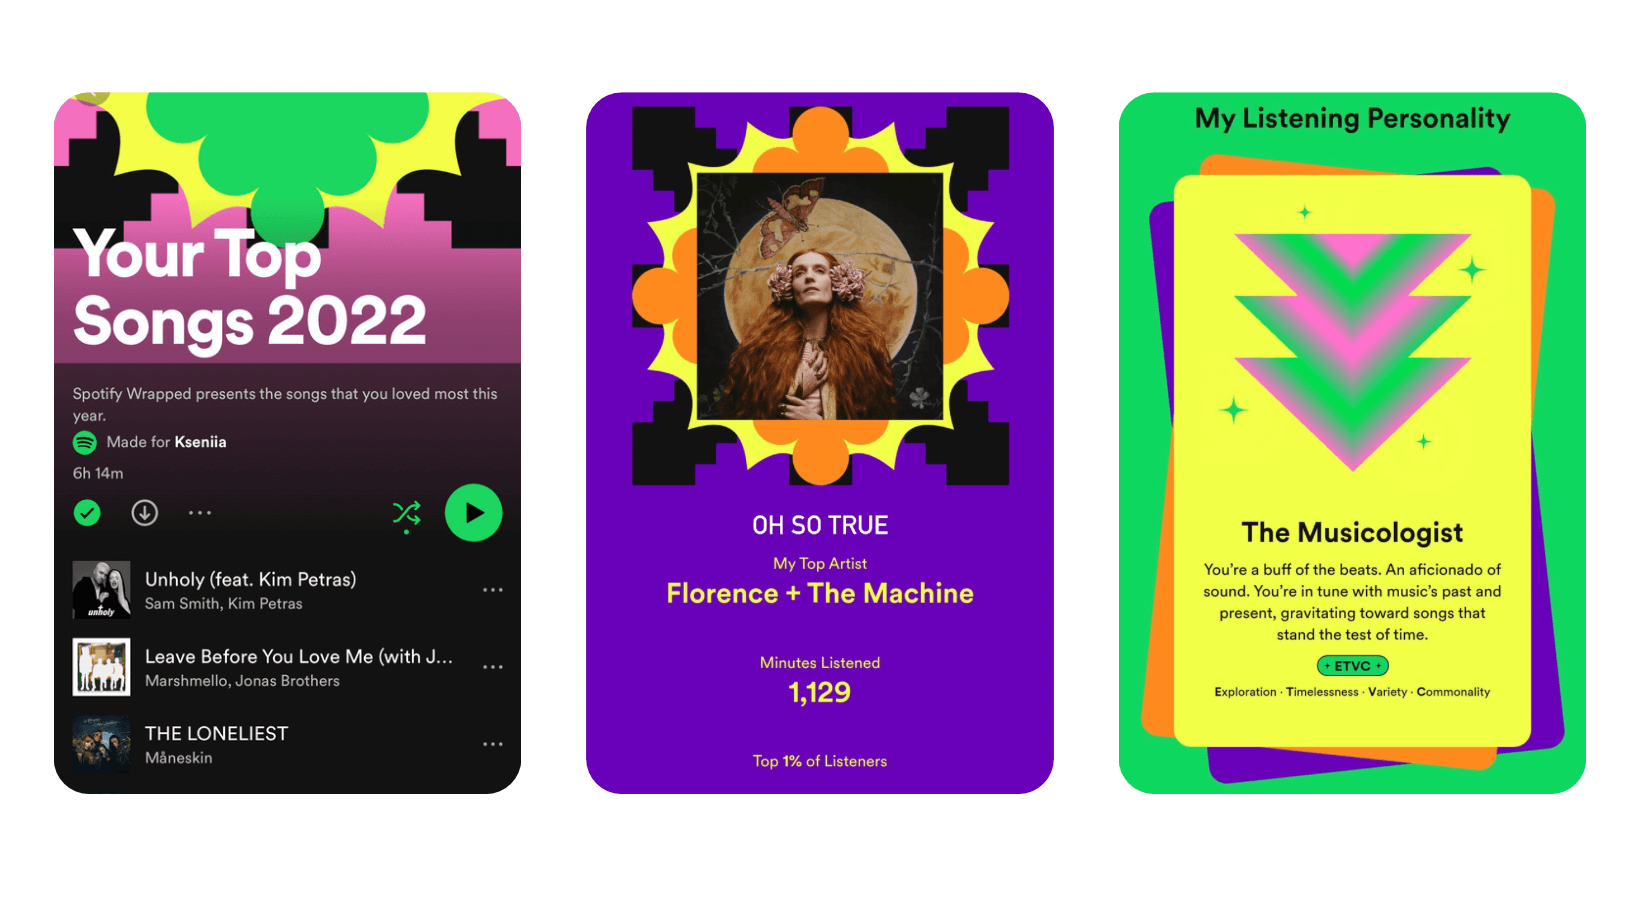 Brightly coloured Spotify wrapped marketing campaign with 2022 statistics for a listener with top songs list, favourite artist Florence and The Machine, 1129 listened minutes and "The musicologist" personality profile.